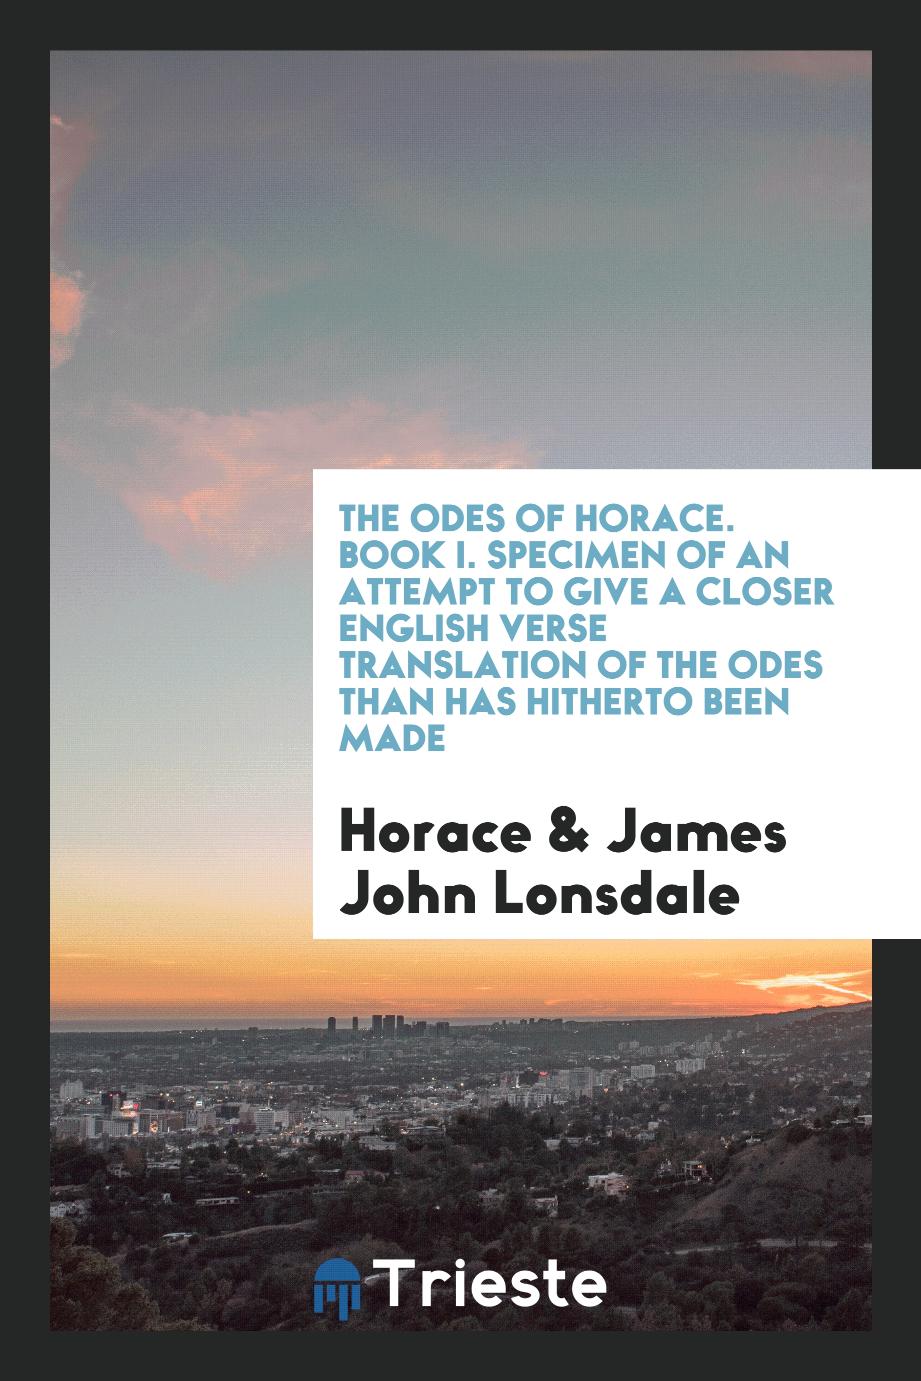 The Odes of Horace. Book I. Specimen of an Attempt to Give a Closer English Verse Translation of the Odes Than Has Hitherto Been Made